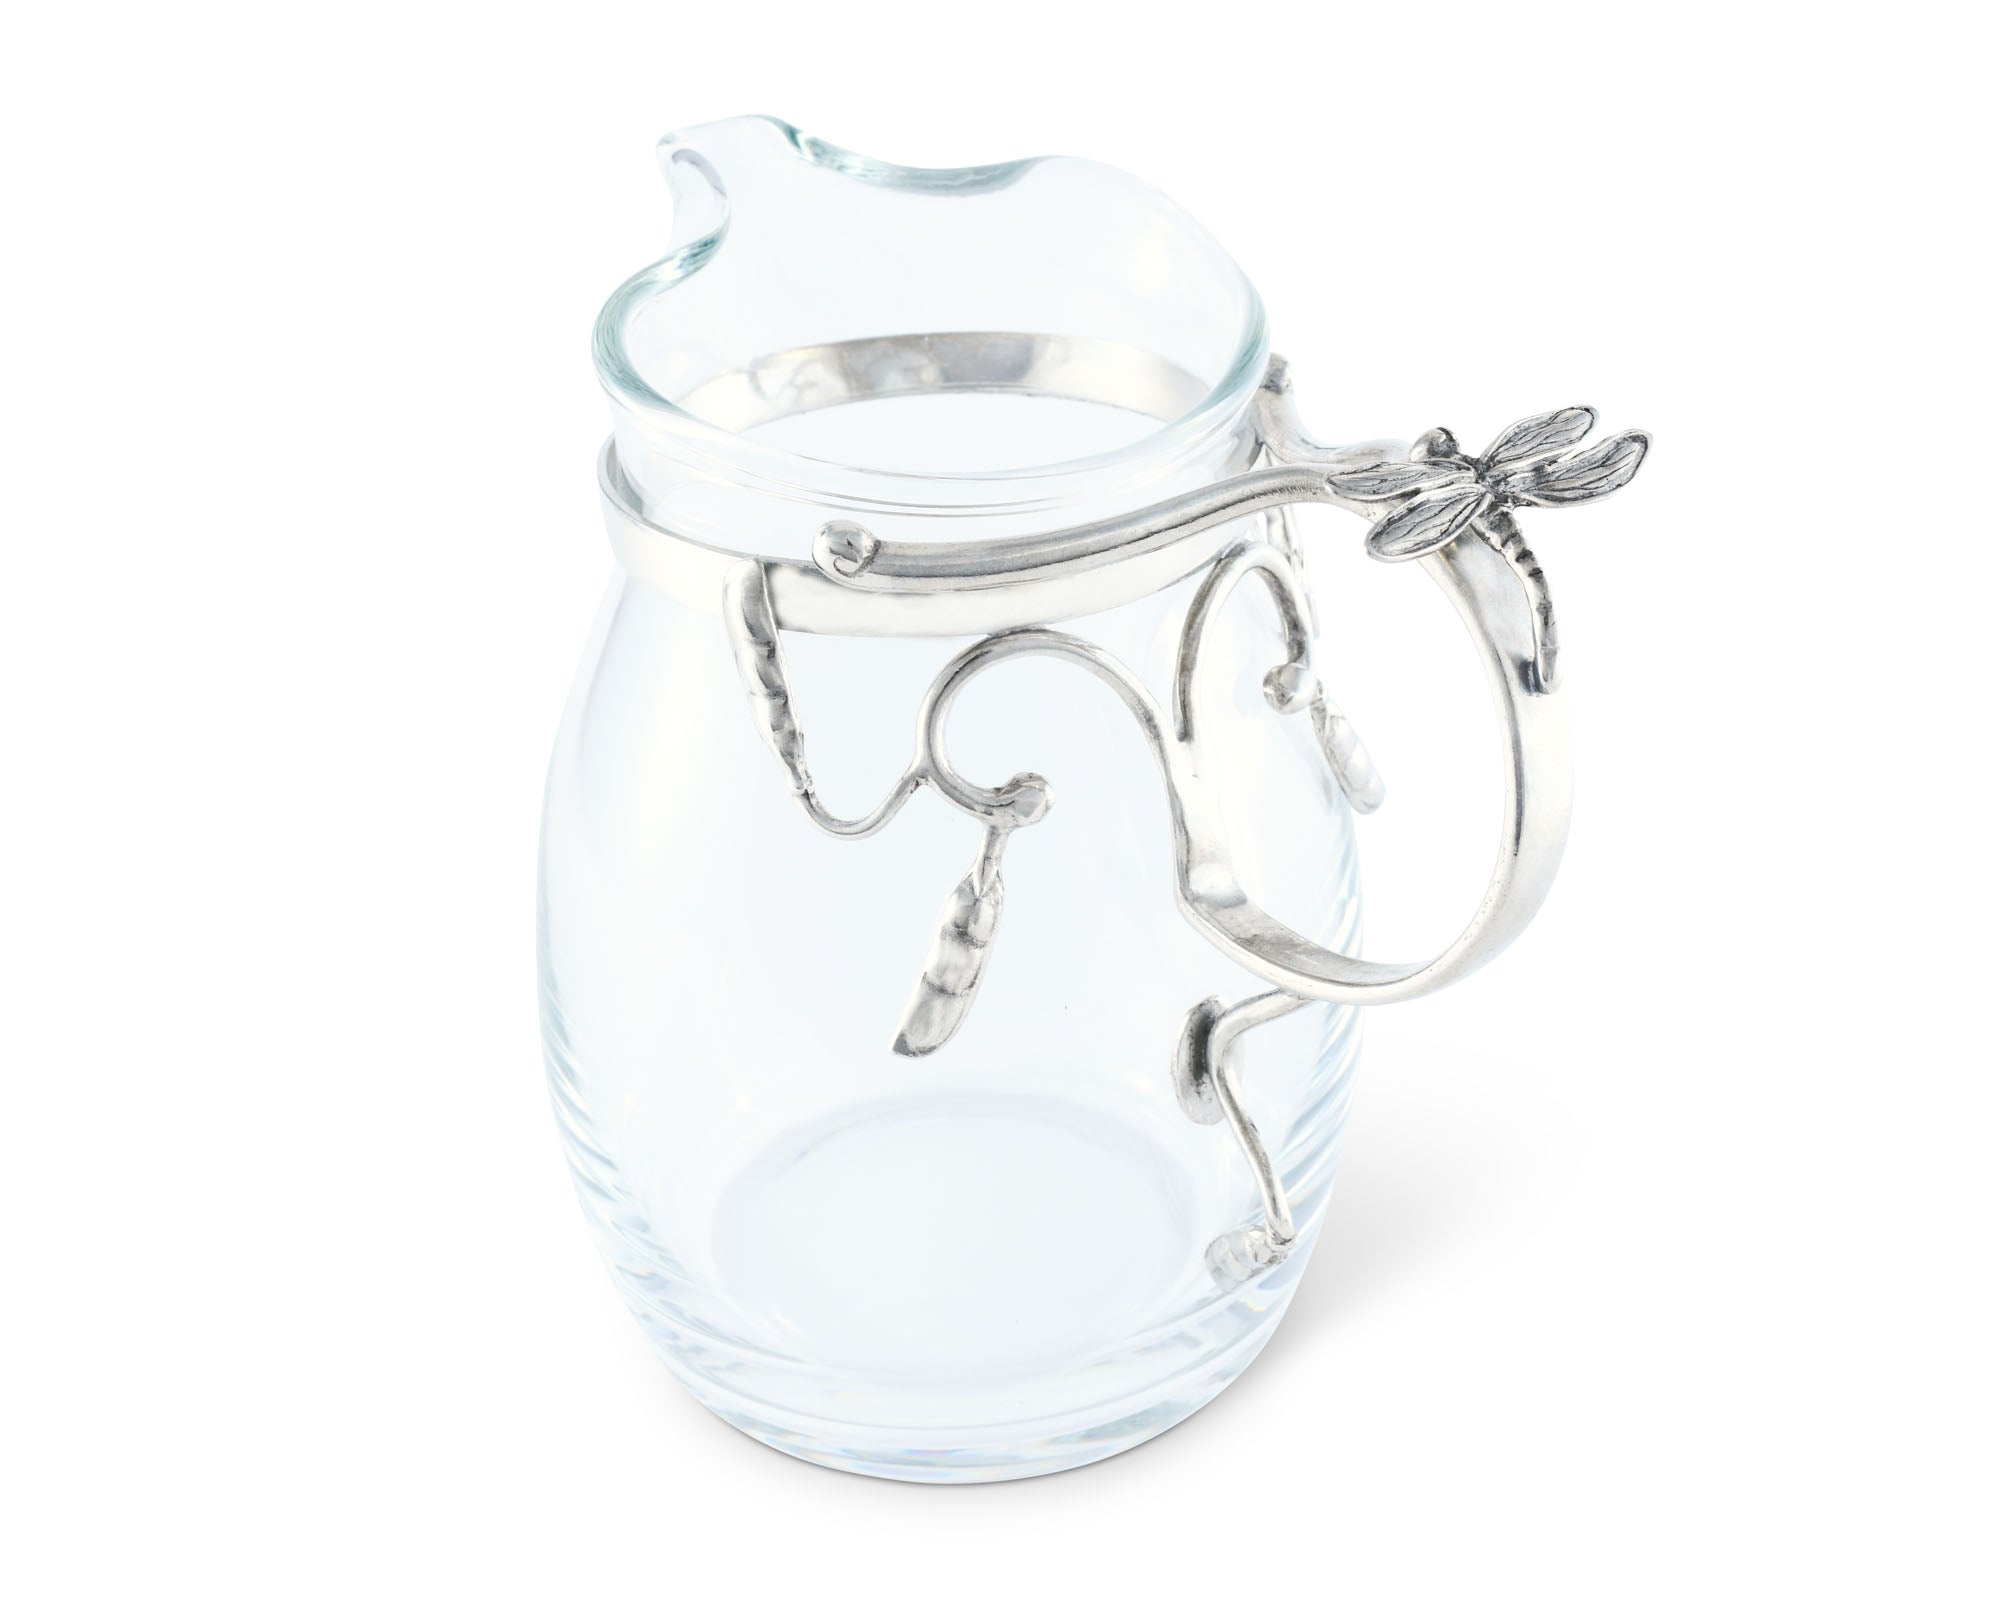 Vagabond House Dragonfly Glass Pitcher Product Image